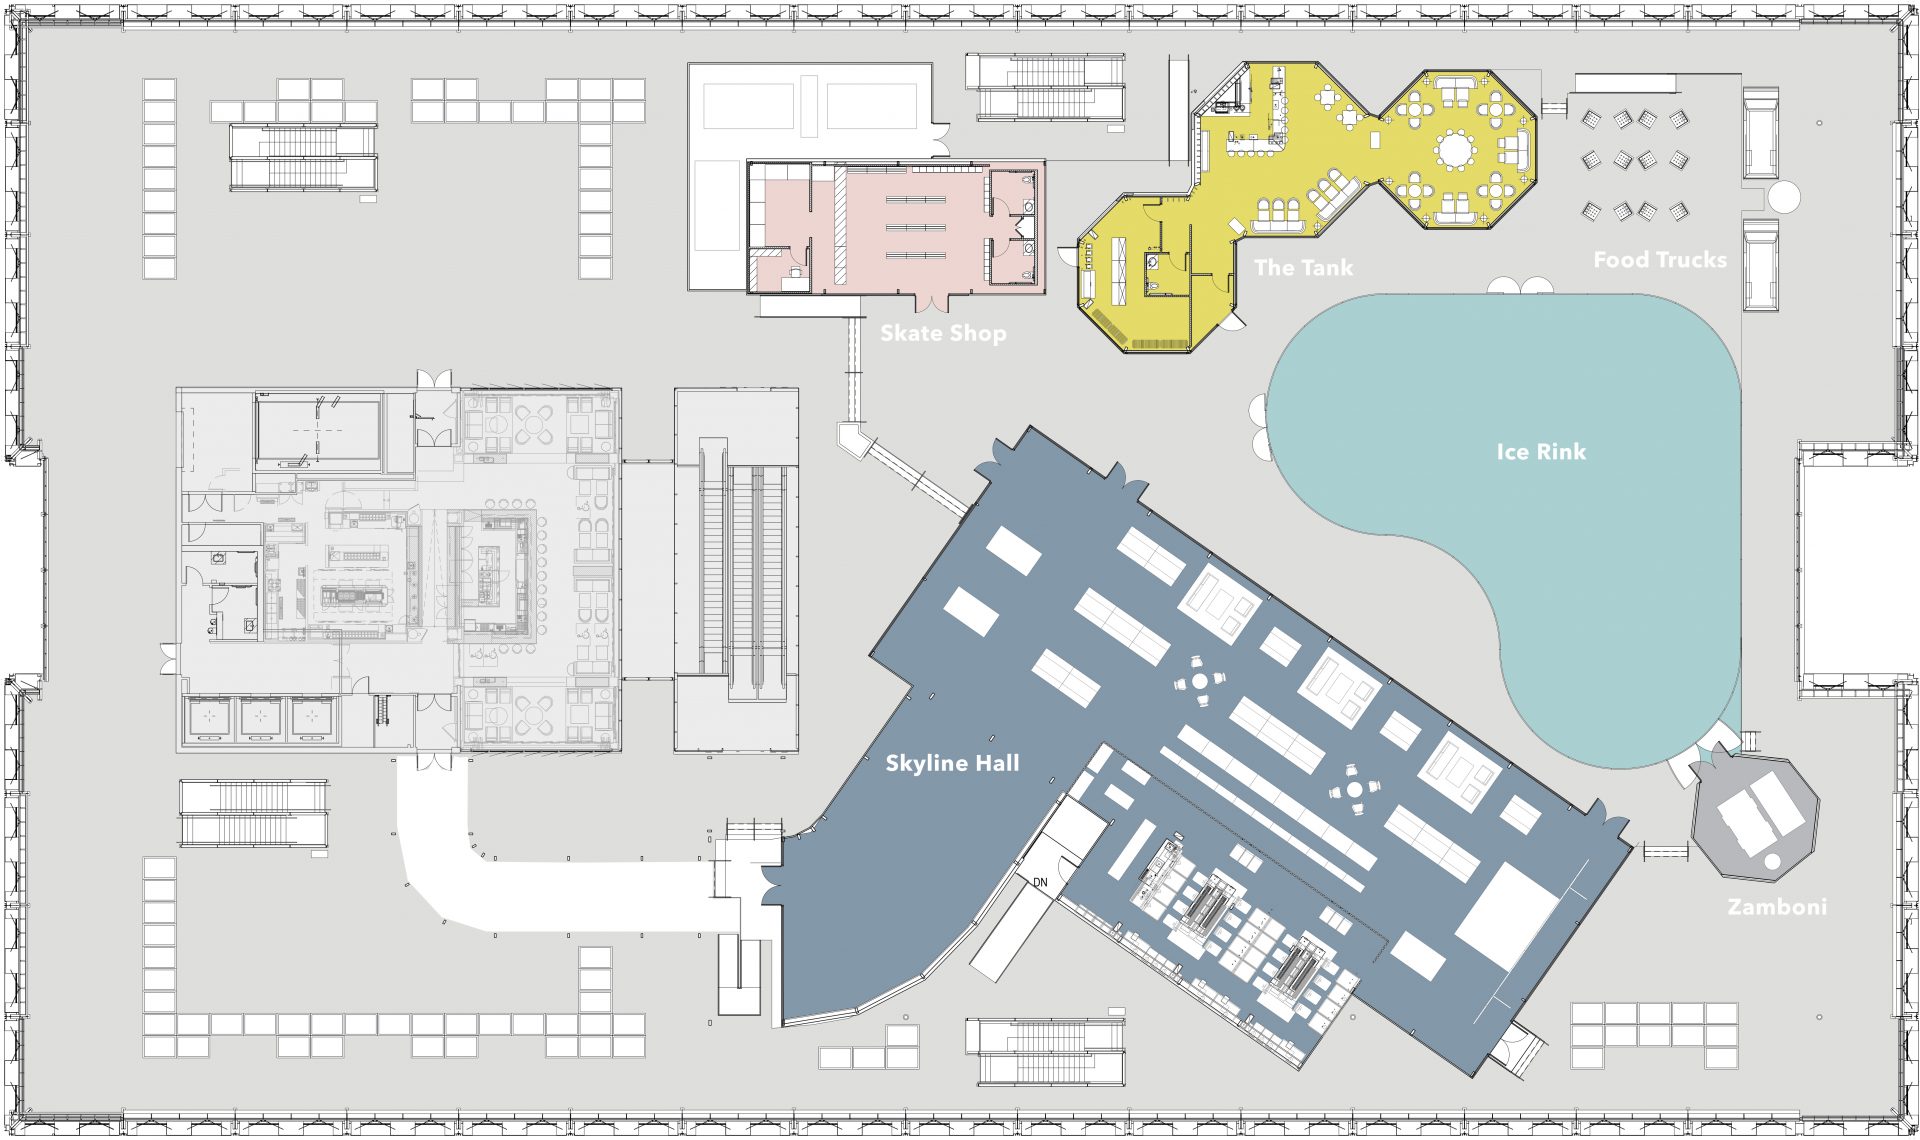 Floorplan of the 2019 Winterland at the Rooftop at Pier 17